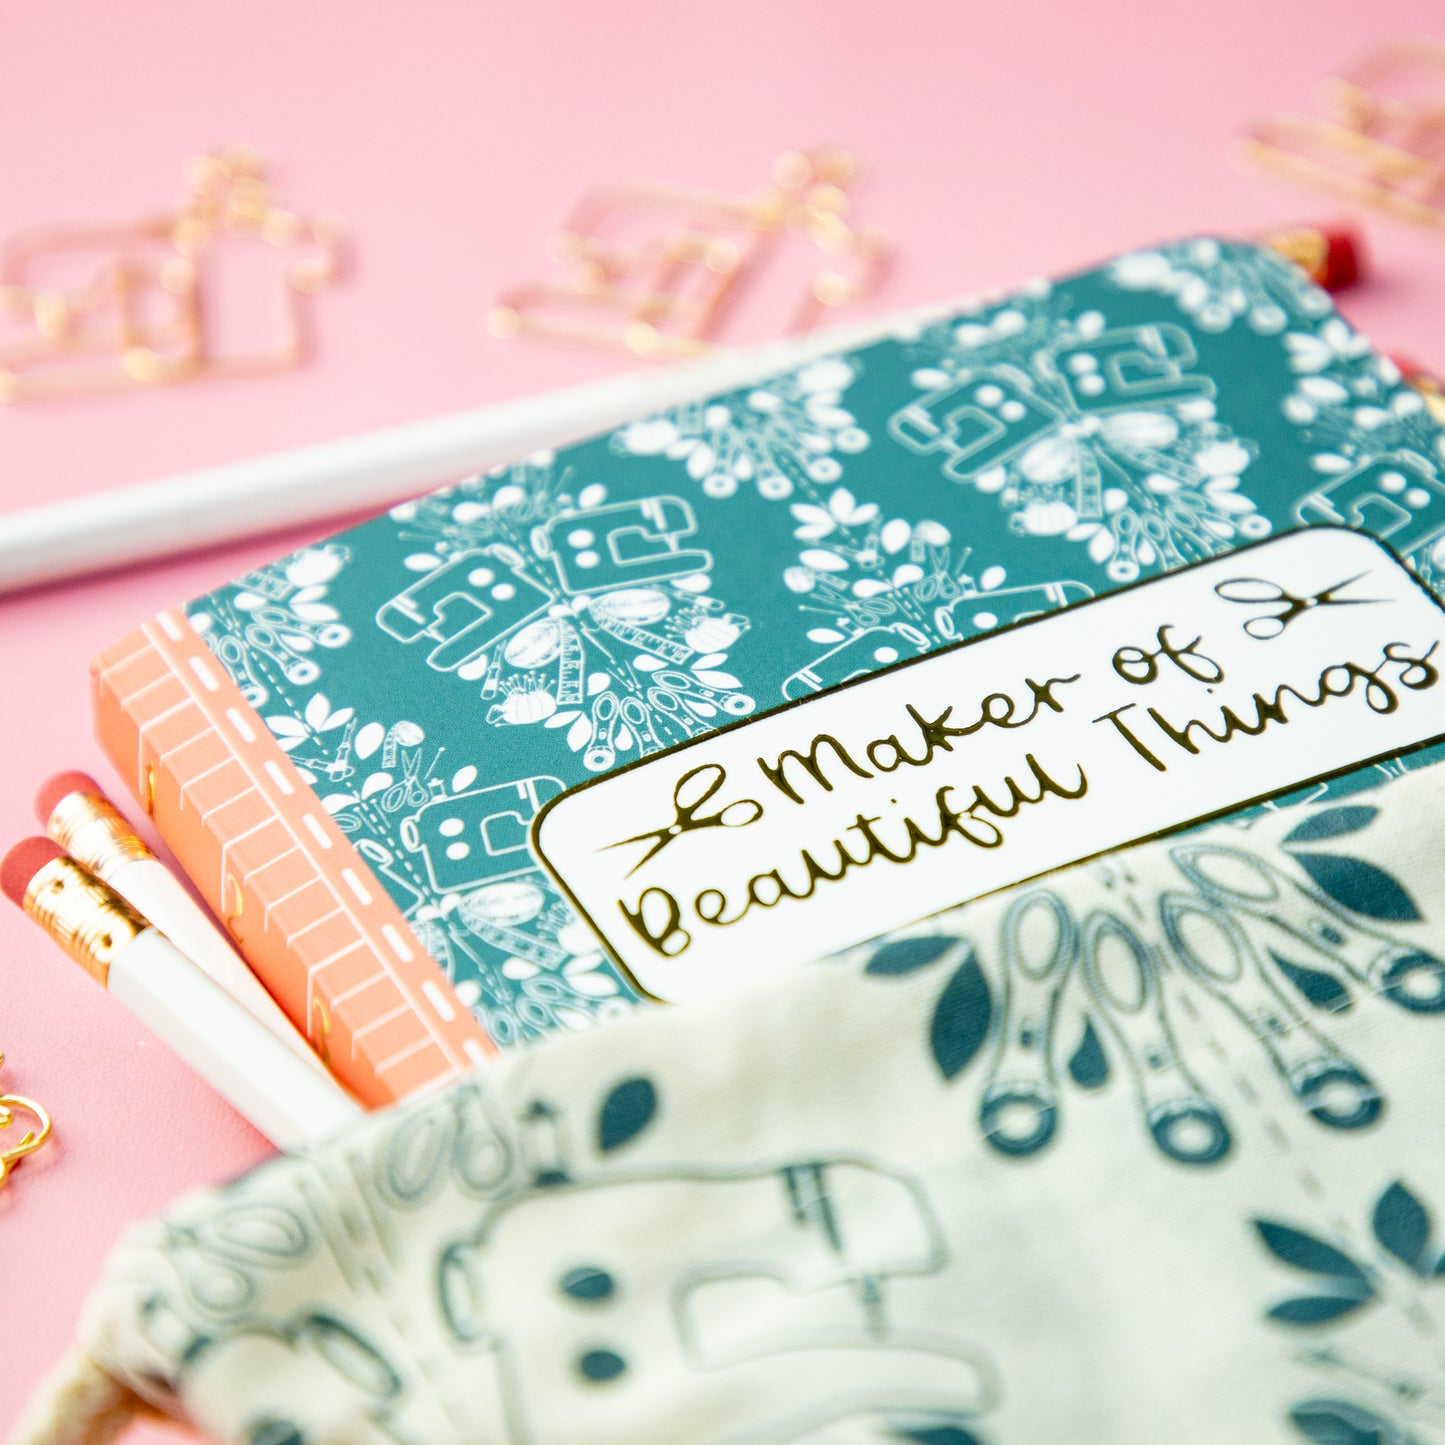 Gifts for Sewing Lovers Set, Sewing Notebook, pencils and paperclips